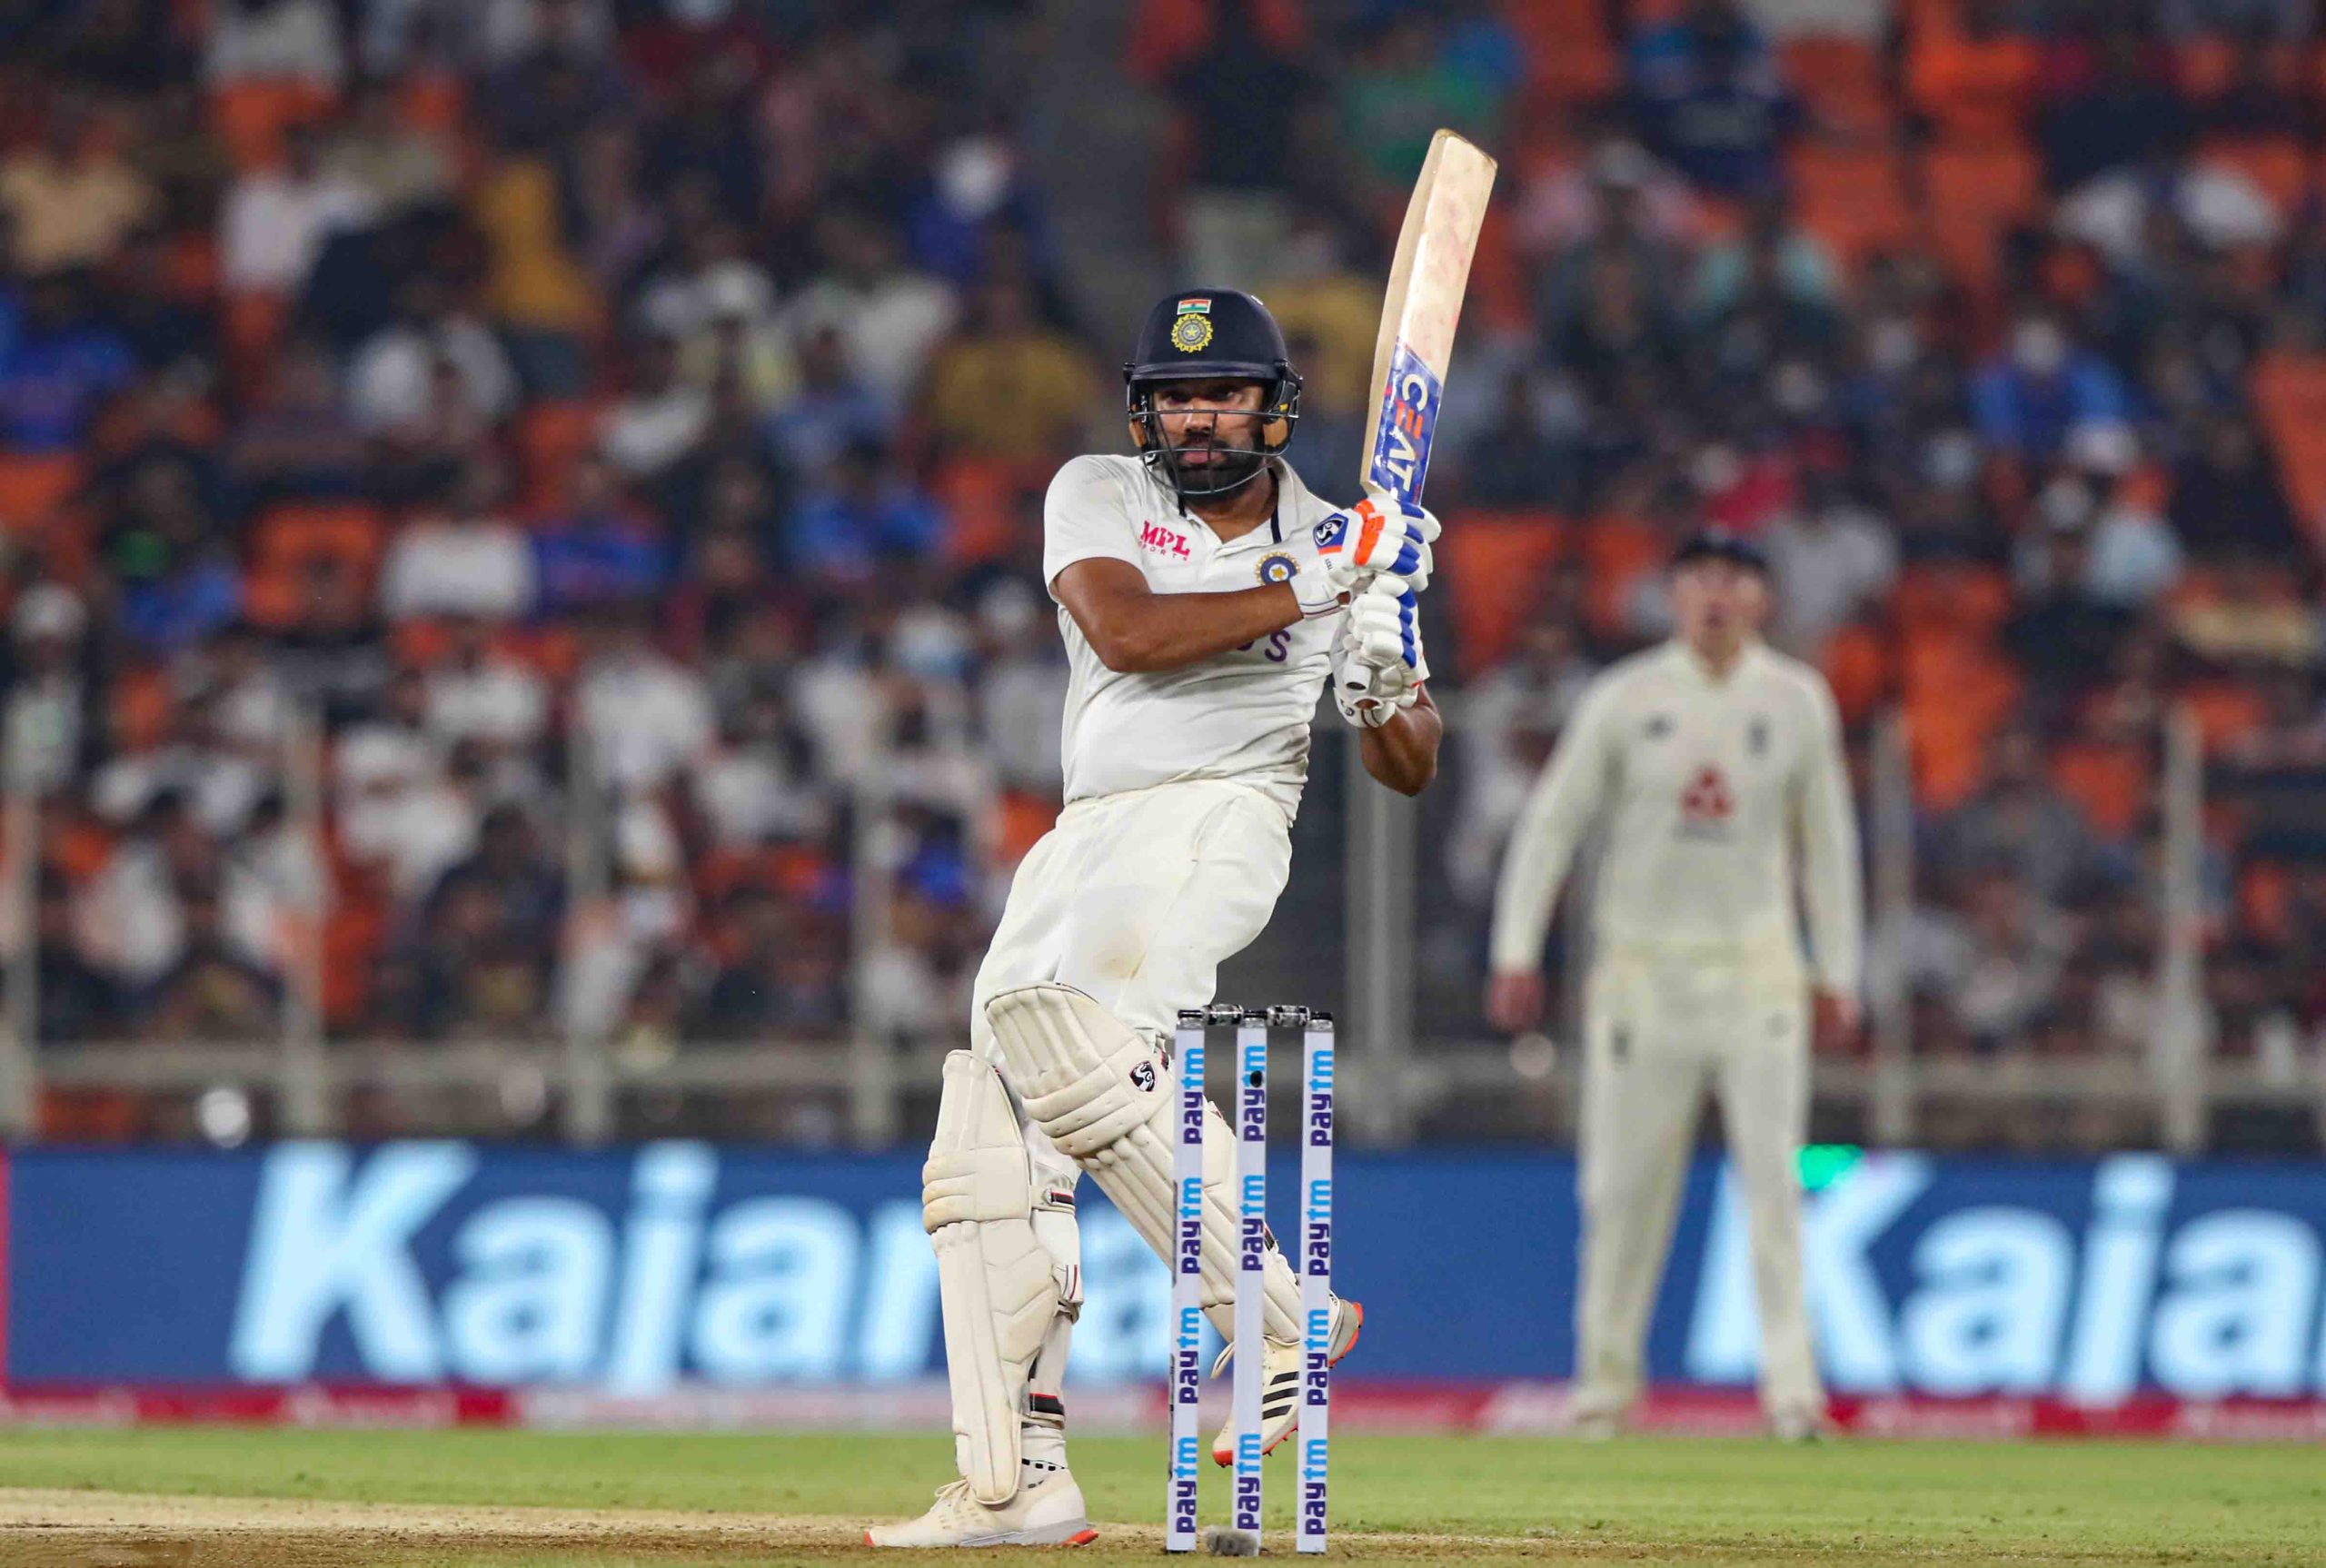 “Want To Achieve What Nobody Has Achieved In South Africa” – Rohit Sharma